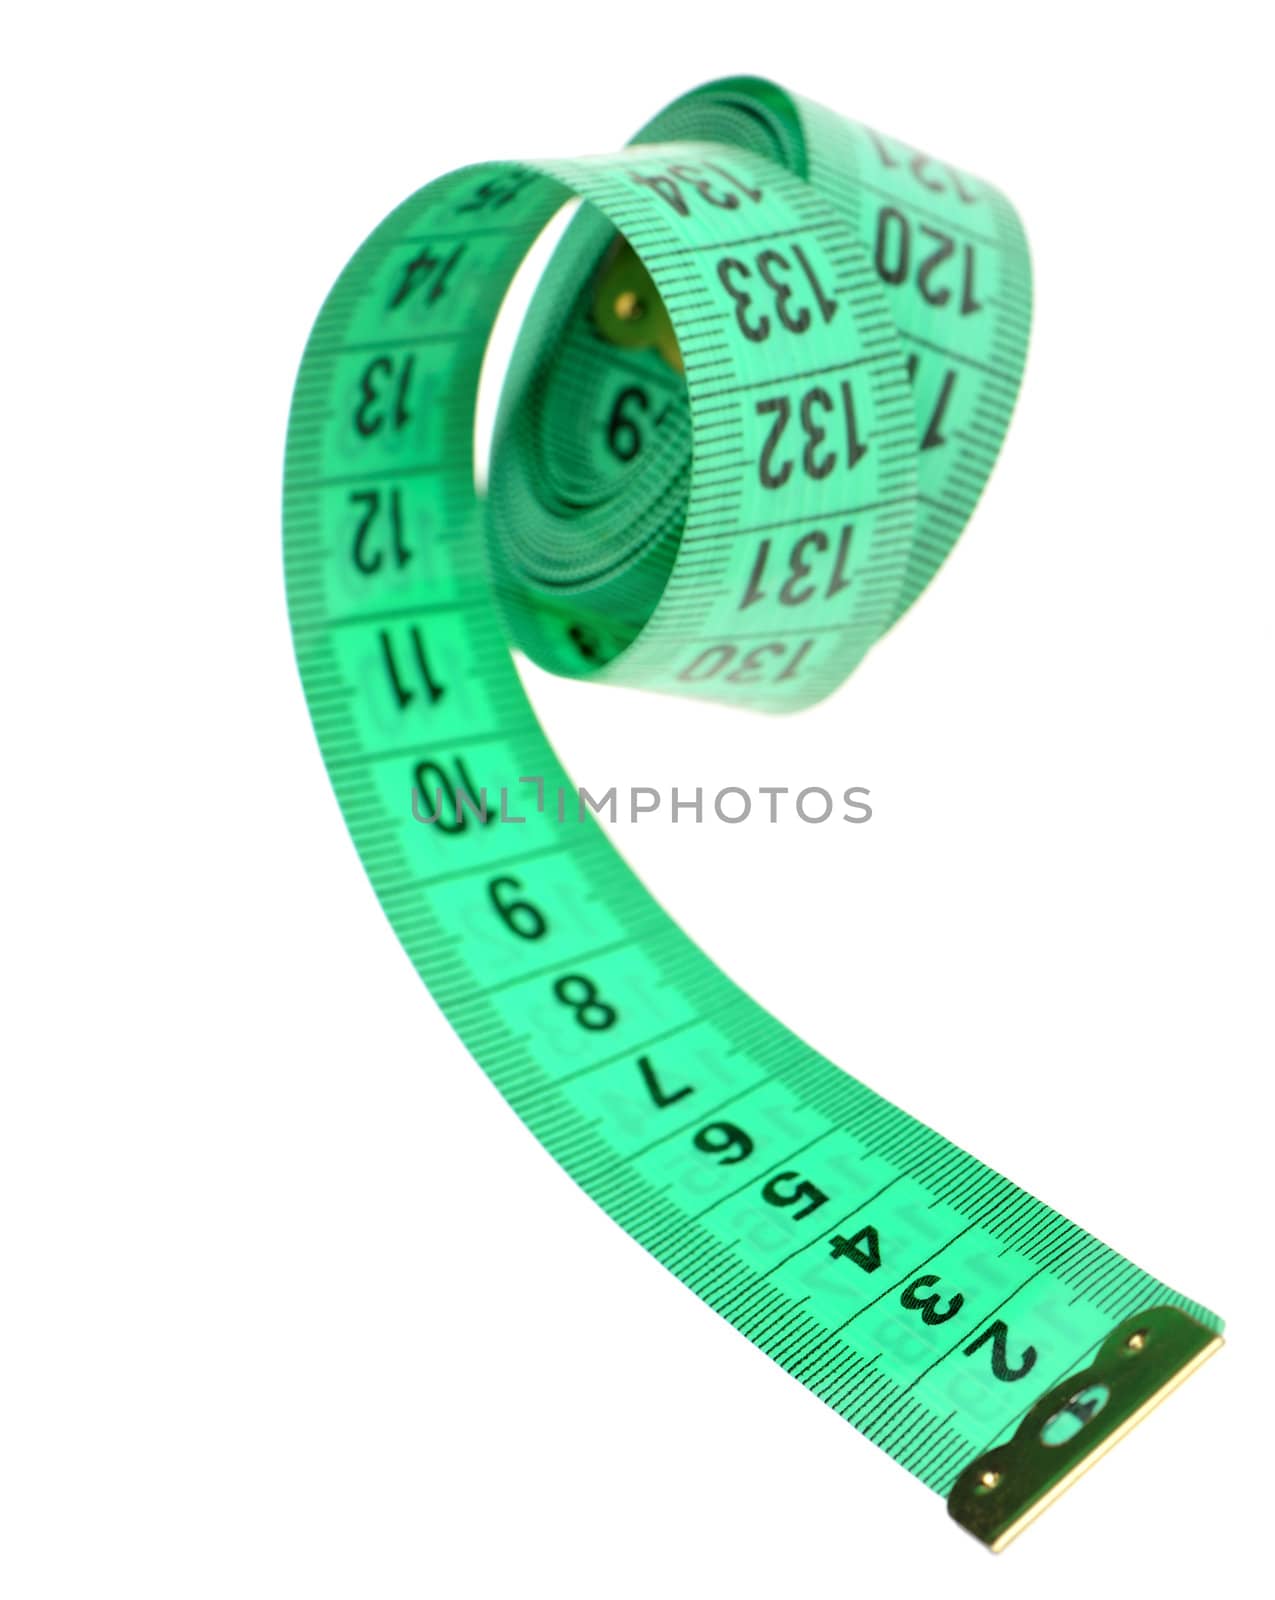 Measuring tape of the tailor green color. It is isolated on a white background